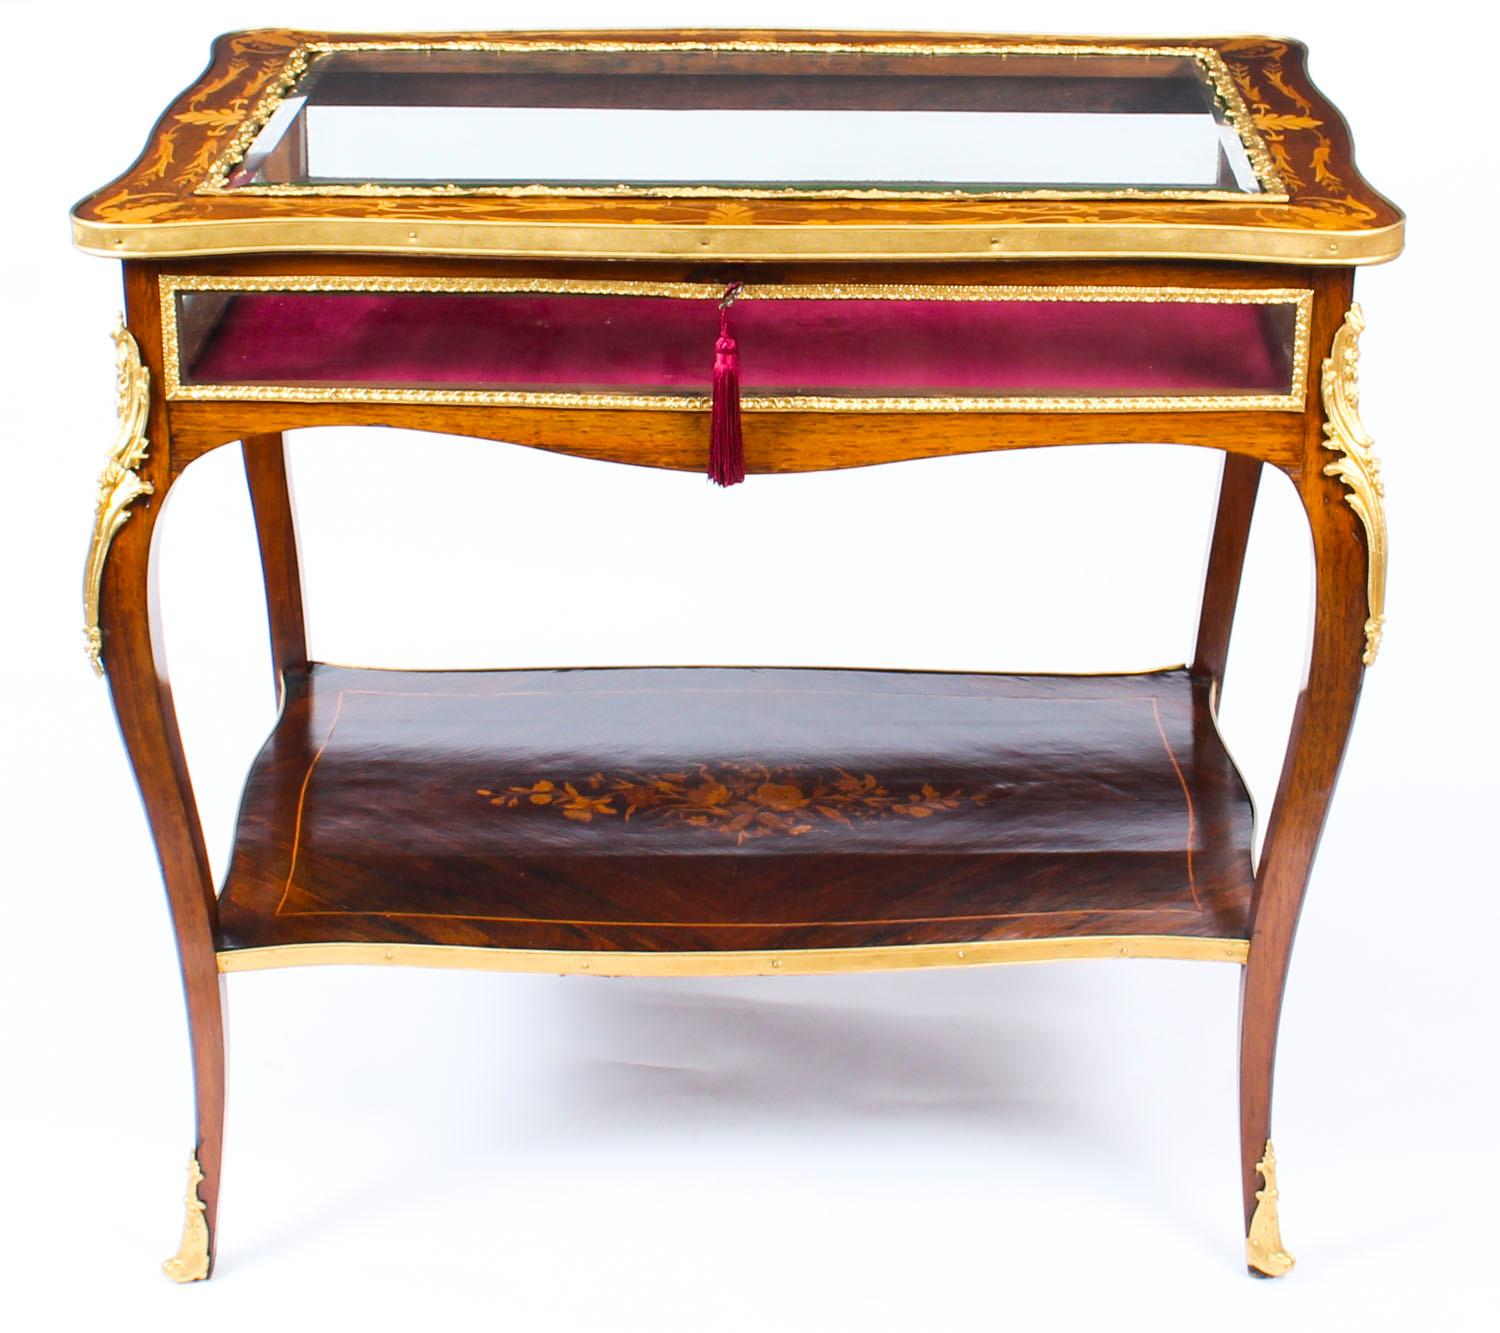 This is a truly wonderful large antique French Gonçalo Alves and ormolu-mounted Louis Revival bijouterie display table circa 1860 in date.

The display table features a hinged and shaped beveled glass top inlaid with harebells and acanthus leaves,